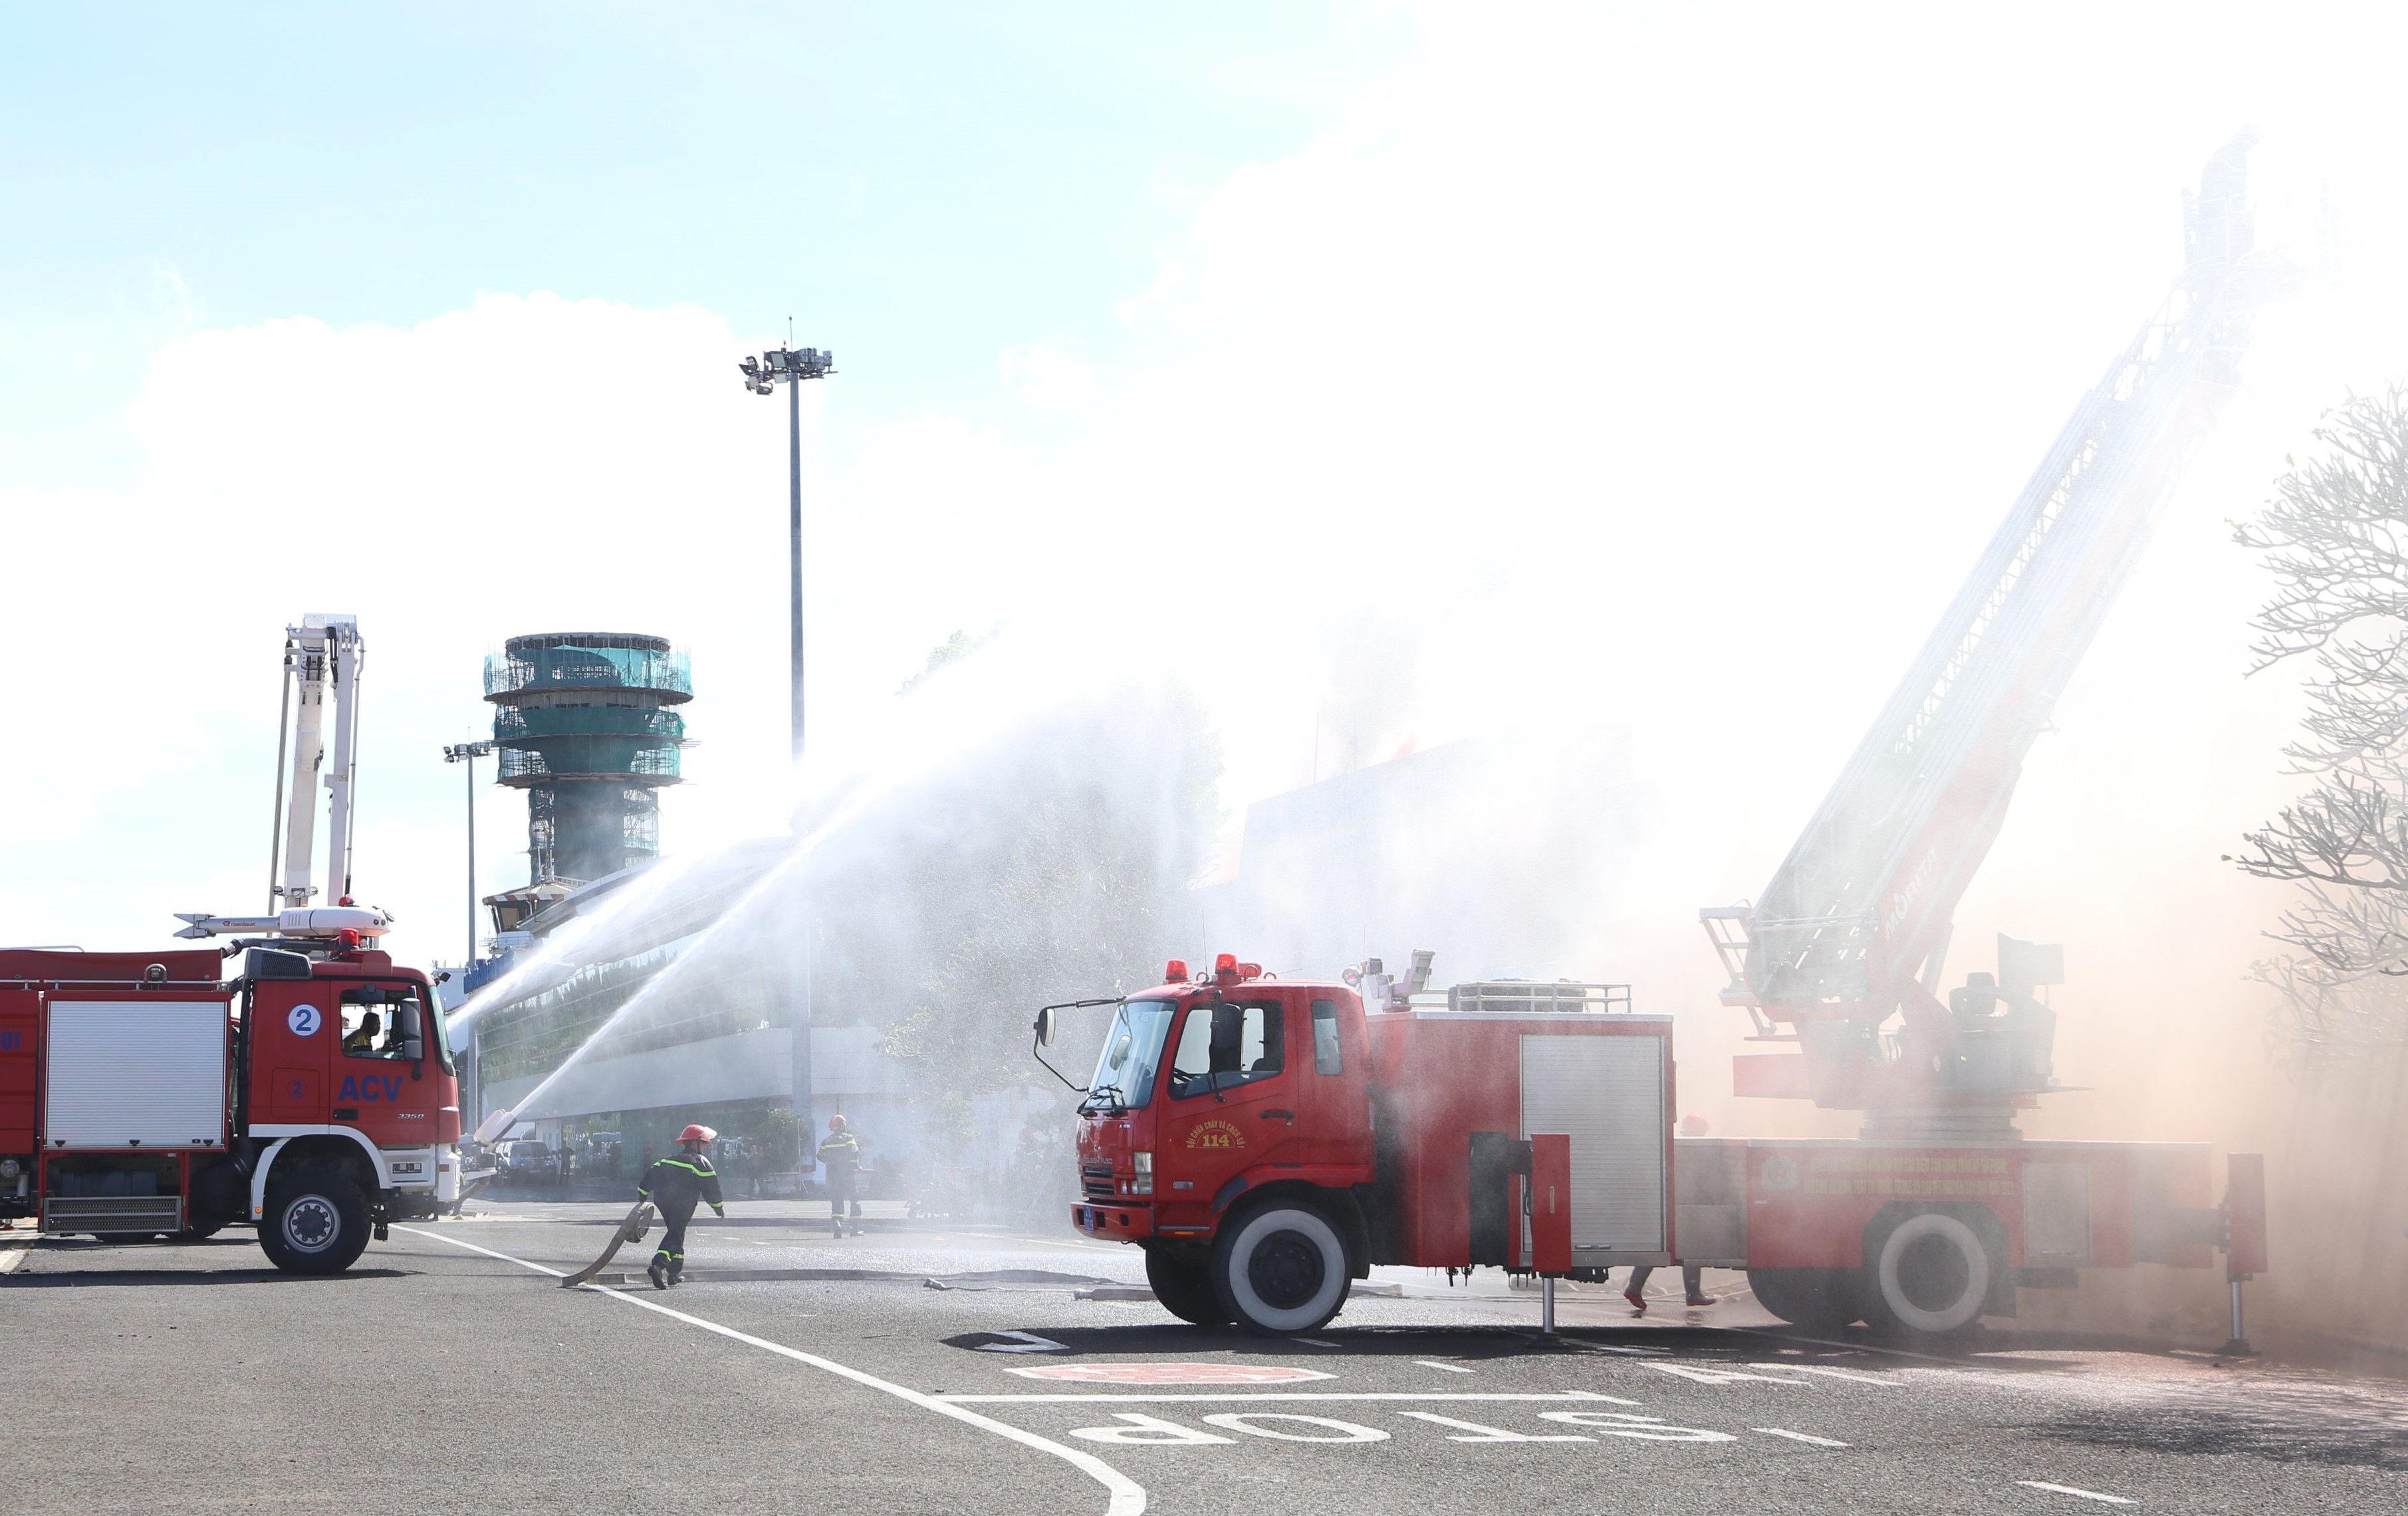 Closing of the National Drill on response to illegal interference in civil aviation activities